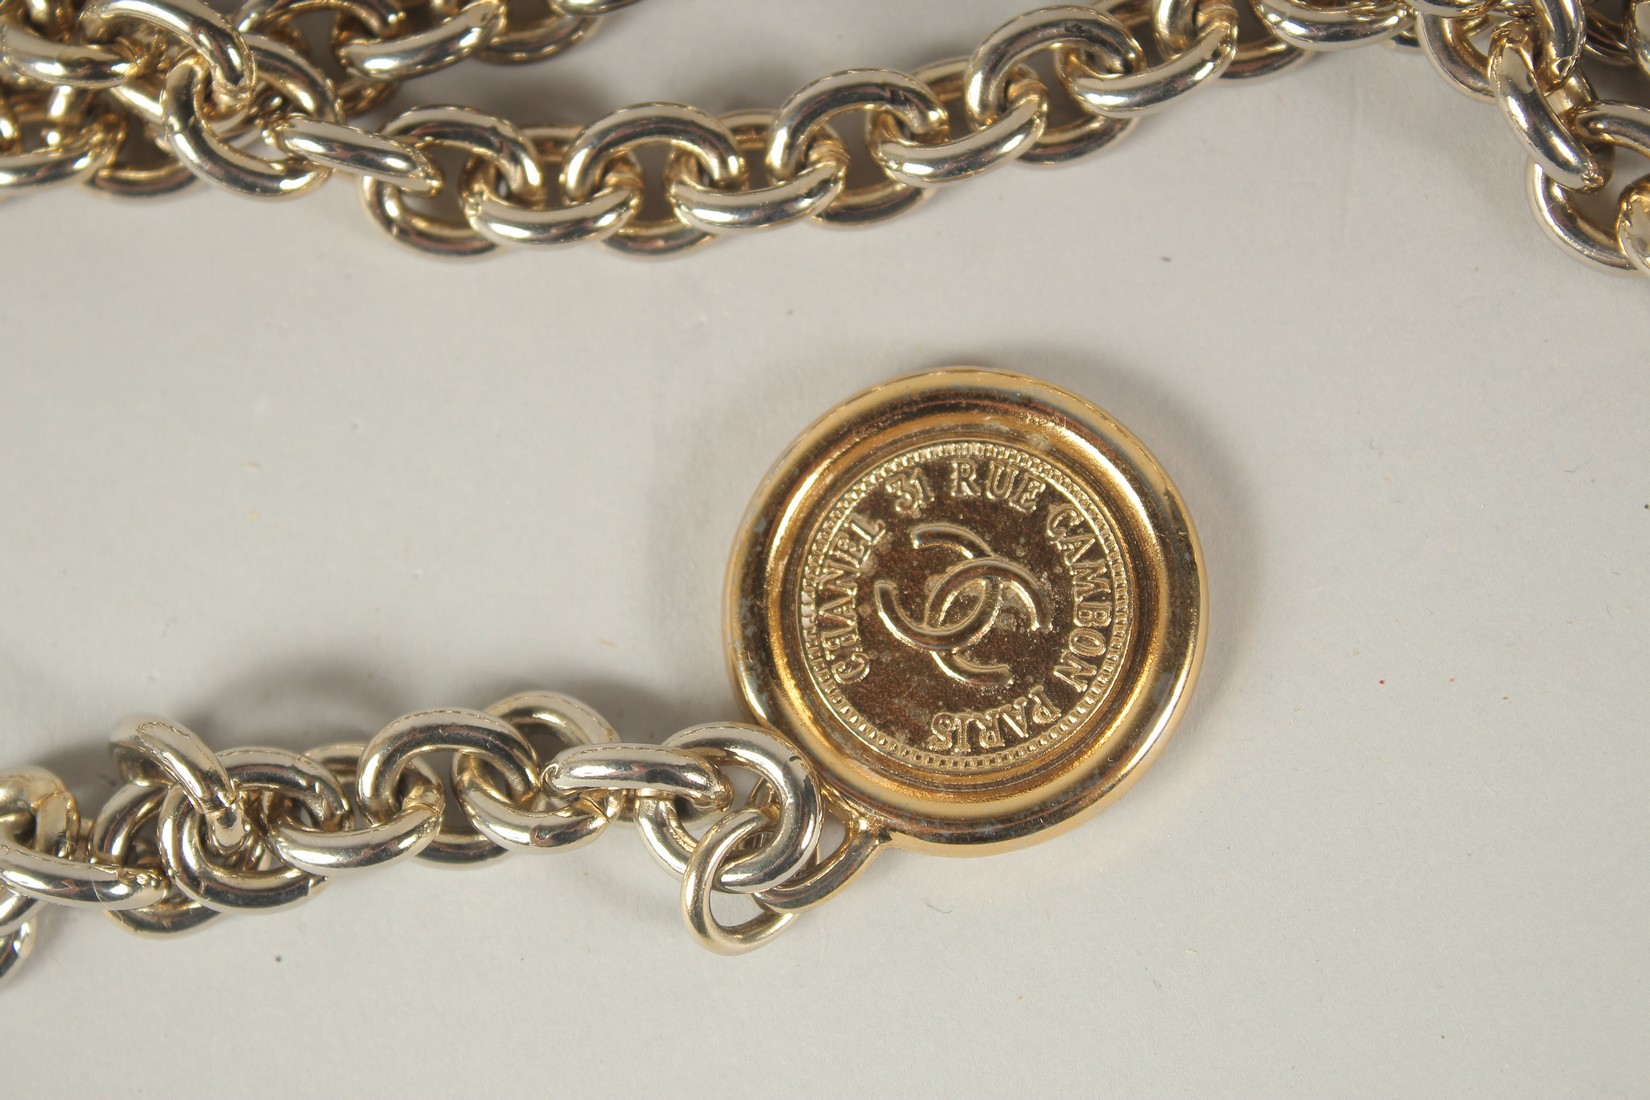 A LONG CHANEL GILT BELT with pendant and tie, double C emblem. 110cms long. - Image 8 of 9